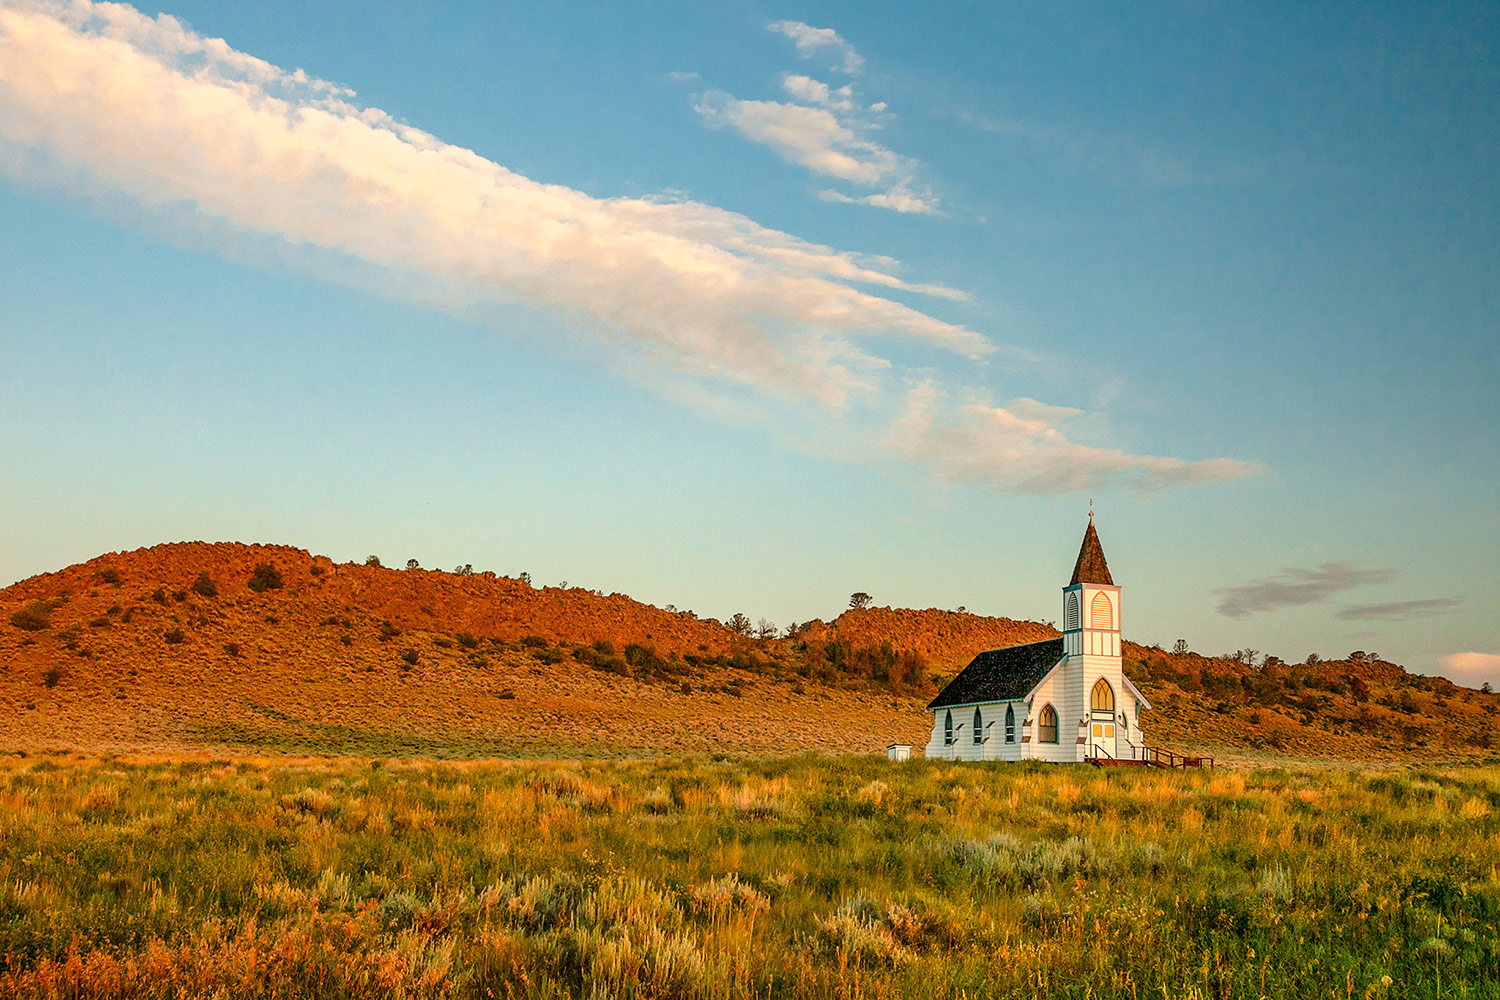 An old rustic rural country church illuminated by the morning light in Lennep, Montana.&nbsp;→ Buy a Print